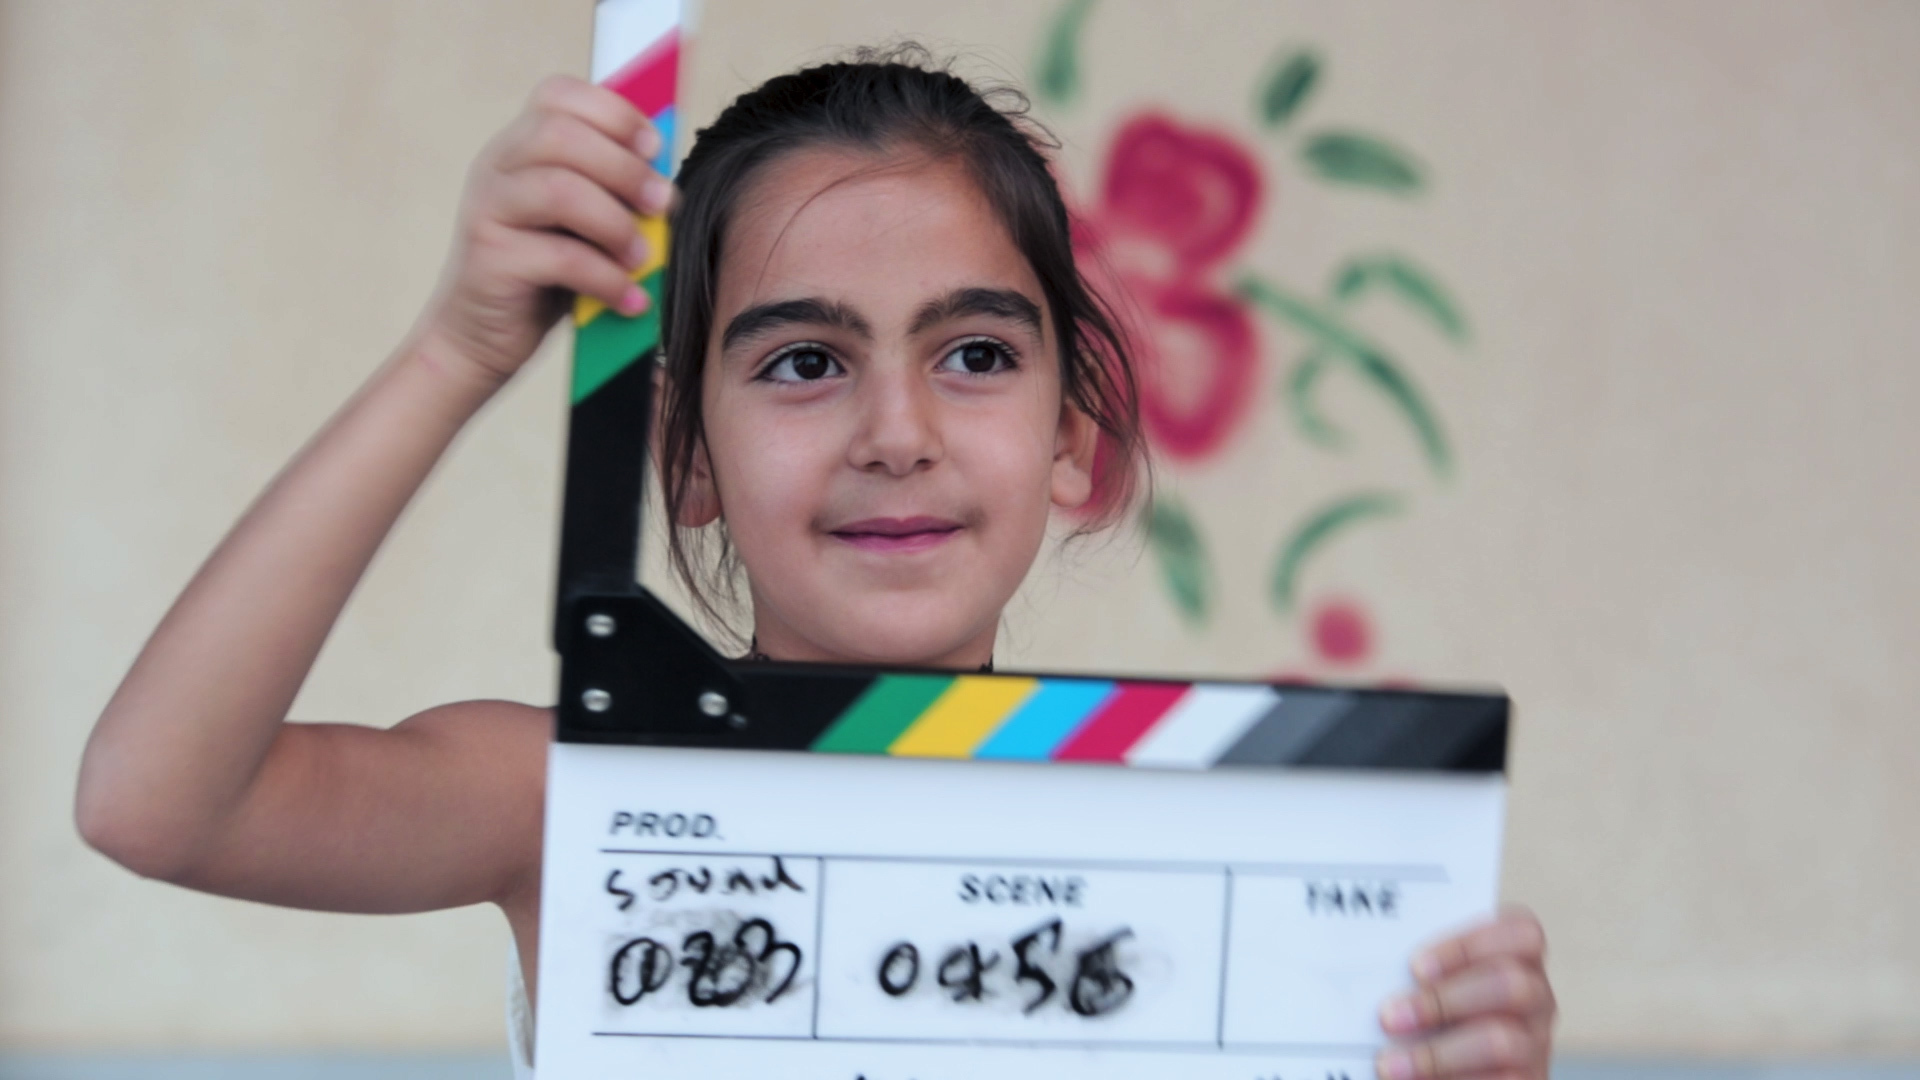 A young Syrian girl holds a clapperboard